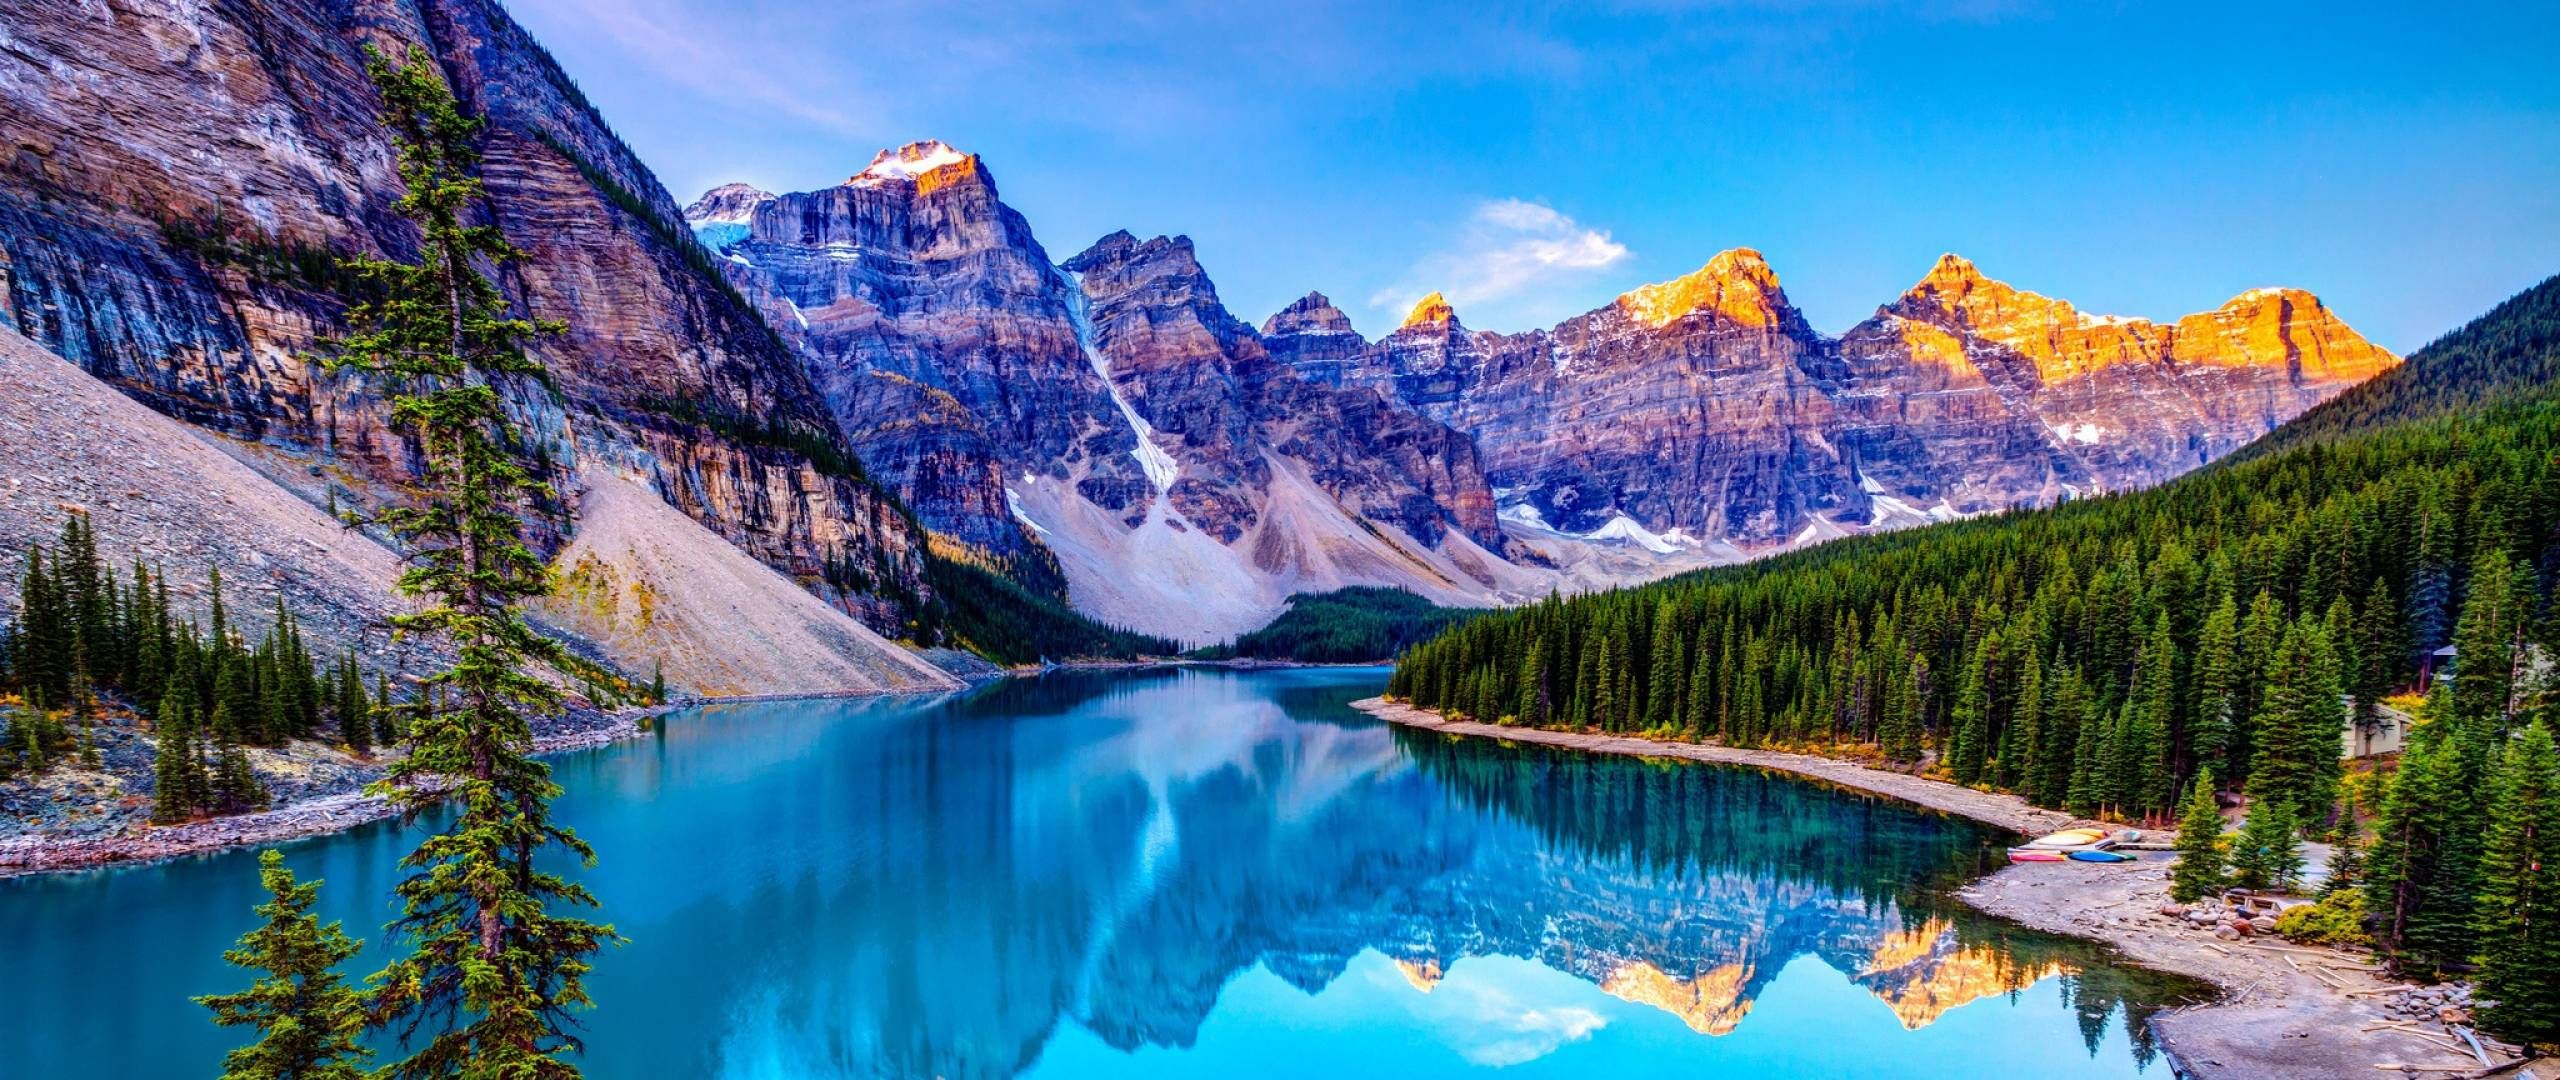 Lake Moraine Banff National Park HD Wallpaper From Gallsource